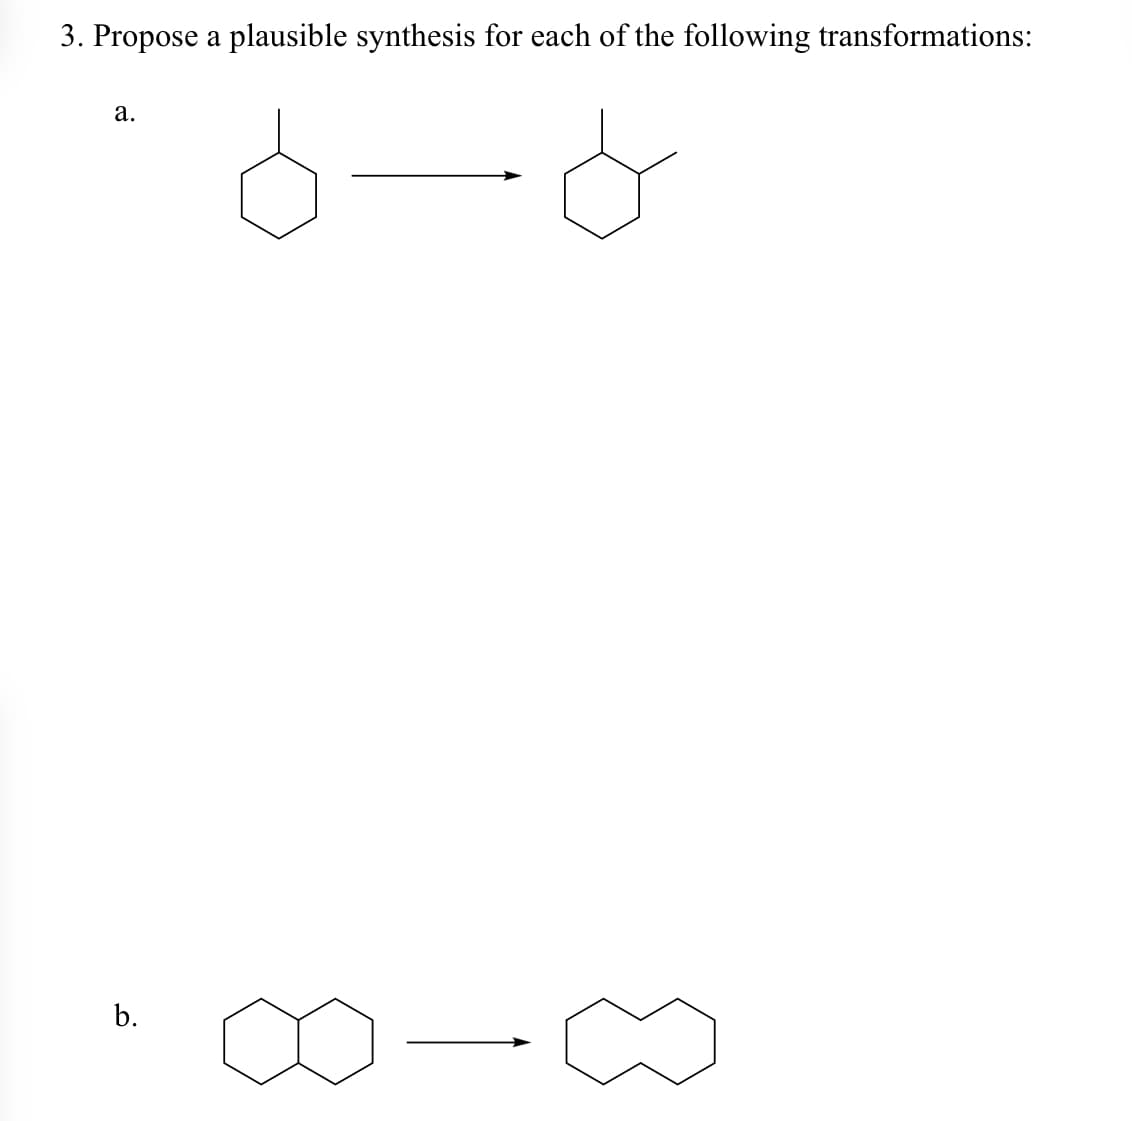 3. Propose a plausible synthesis for each of the following transformations:
a.
b.